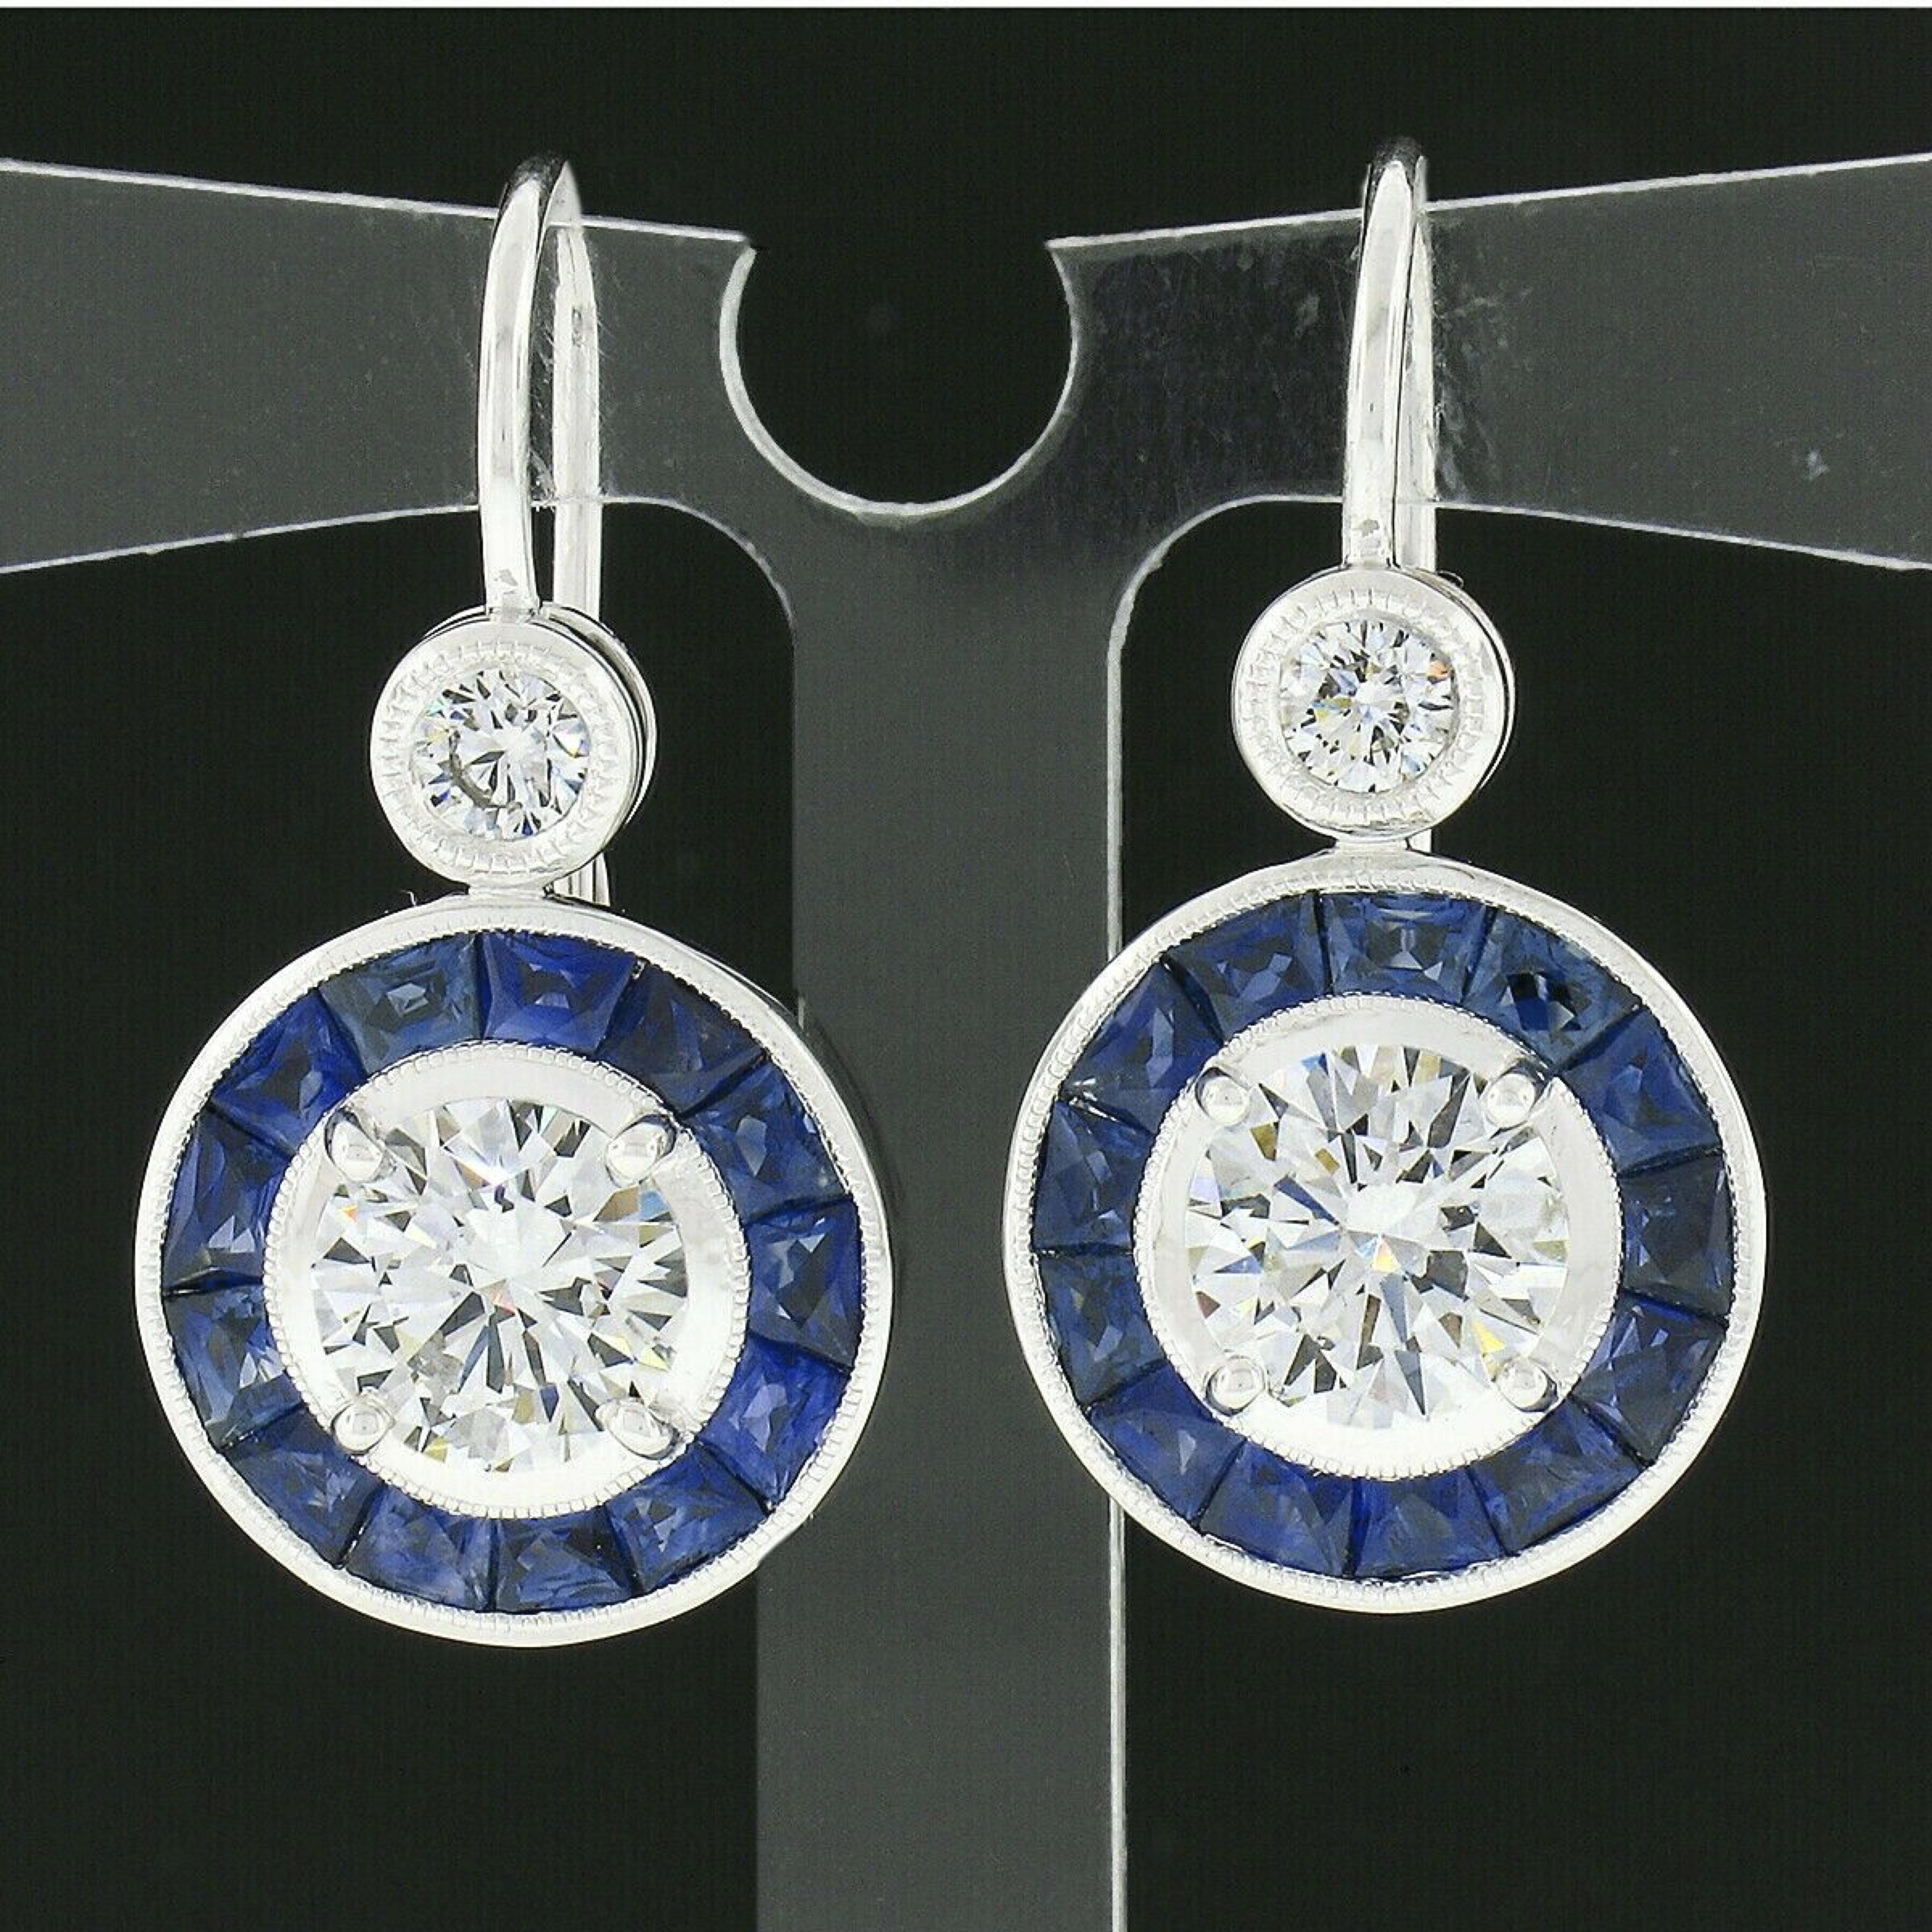 This spectacular and very well made pair of drop earrings is newly crafted in solid 14k white gold and feature two round brilliant cut diamonds that have both been certified by GIA surrounded by a gorgeous halo of natural sapphire stones. The two